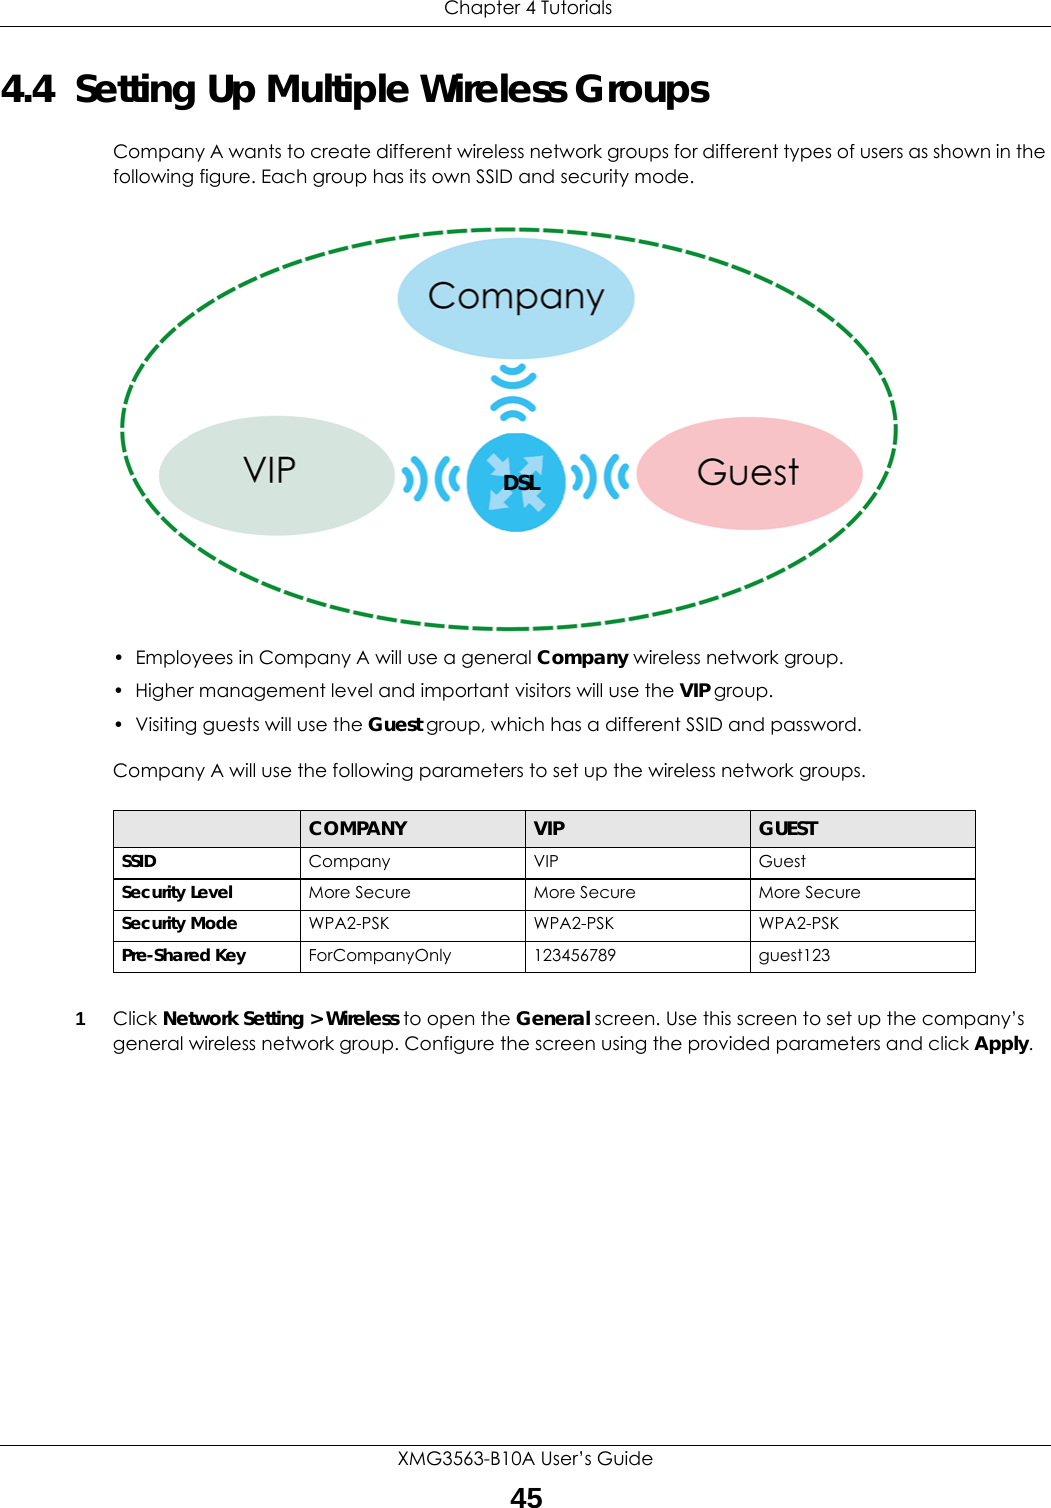  Chapter 4 TutorialsXMG3563-B10A User’s Guide454.4  Setting Up Multiple Wireless GroupsCompany A wants to create different wireless network groups for different types of users as shown in the following figure. Each group has its own SSID and security mode.• Employees in Company A will use a general Company wireless network group.• Higher management level and important visitors will use the VIP group.• Visiting guests will use the Guest group, which has a different SSID and password.Company A will use the following parameters to set up the wireless network groups.1Click Network Setting &gt; Wireless to open the General screen. Use this screen to set up the company’s general wireless network group. Configure the screen using the provided parameters and click Apply.COMPANY VIP GUESTSSID Company VIP GuestSecurity Level More Secure More Secure More SecureSecurity Mode WPA2-PSK WPA2-PSK WPA2-PSKPre-Shared Key ForCompanyOnly 123456789 guest123DSL